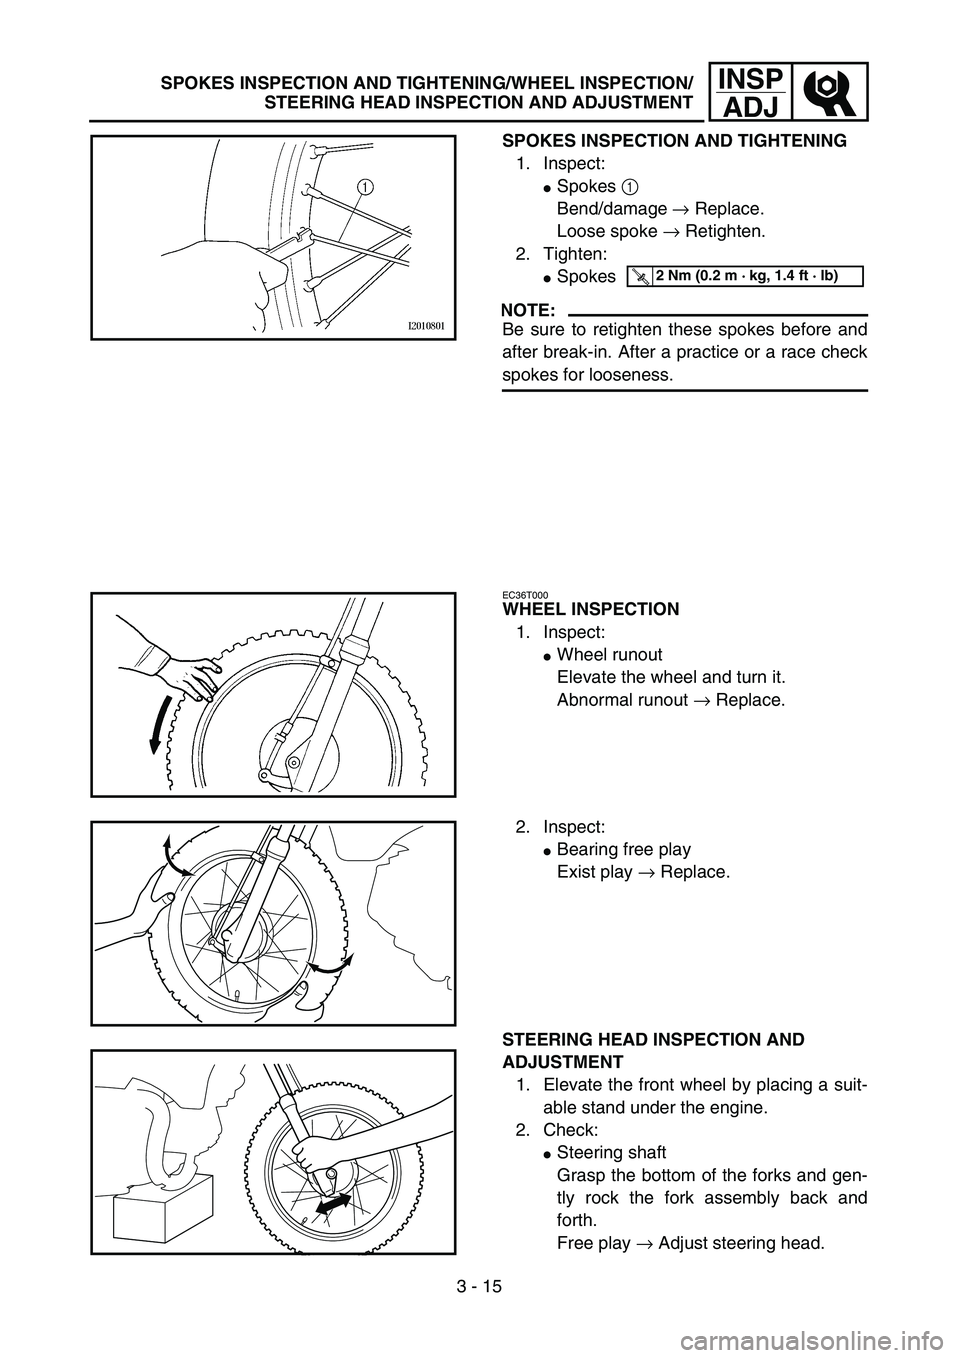 YAMAHA TTR90 2004  Owners Manual 3 - 15
INSP
ADJSPOKES INSPECTION AND TIGHTENING/WHEEL INSPECTION/
STEERING HEAD INSPECTION AND ADJUSTMENT
SPOKES INSPECTION AND TIGHTENING
1. Inspect:
Spokes 1 
Bend/damage → Replace.
Loose spoke �